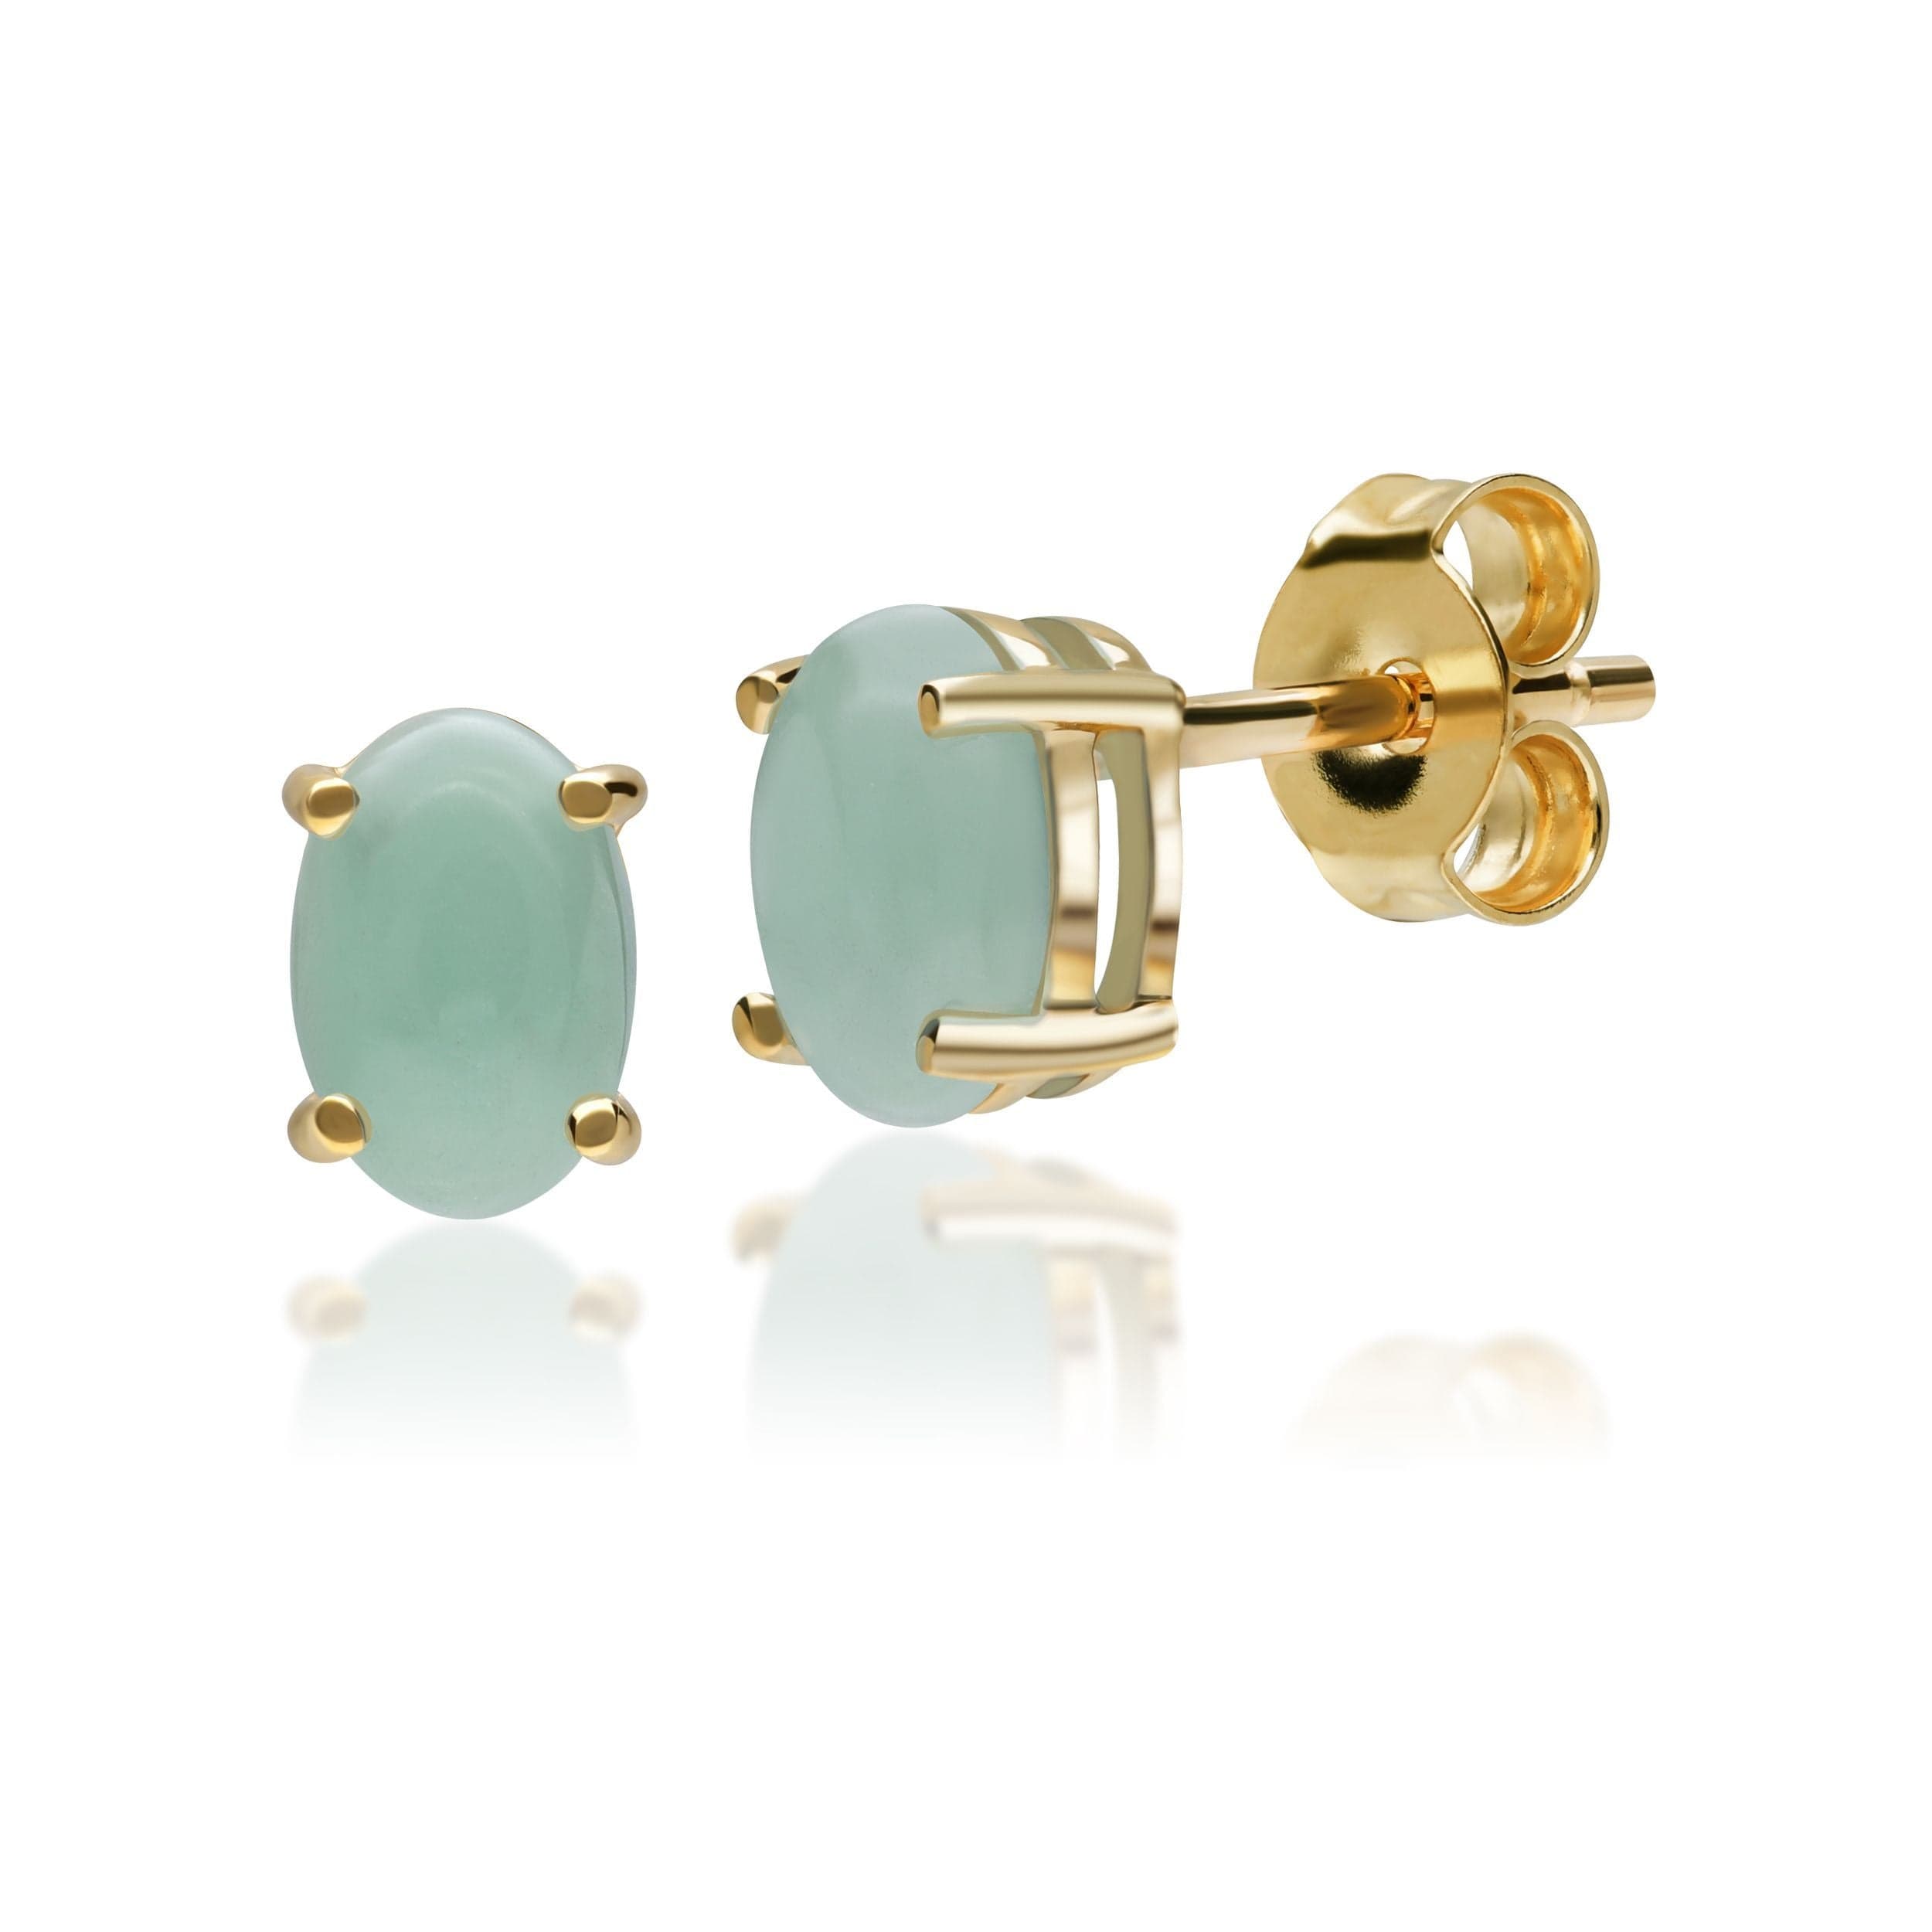 10224 Classic Oval Jade Stud Earrings in 9ct Yellow Gold 1